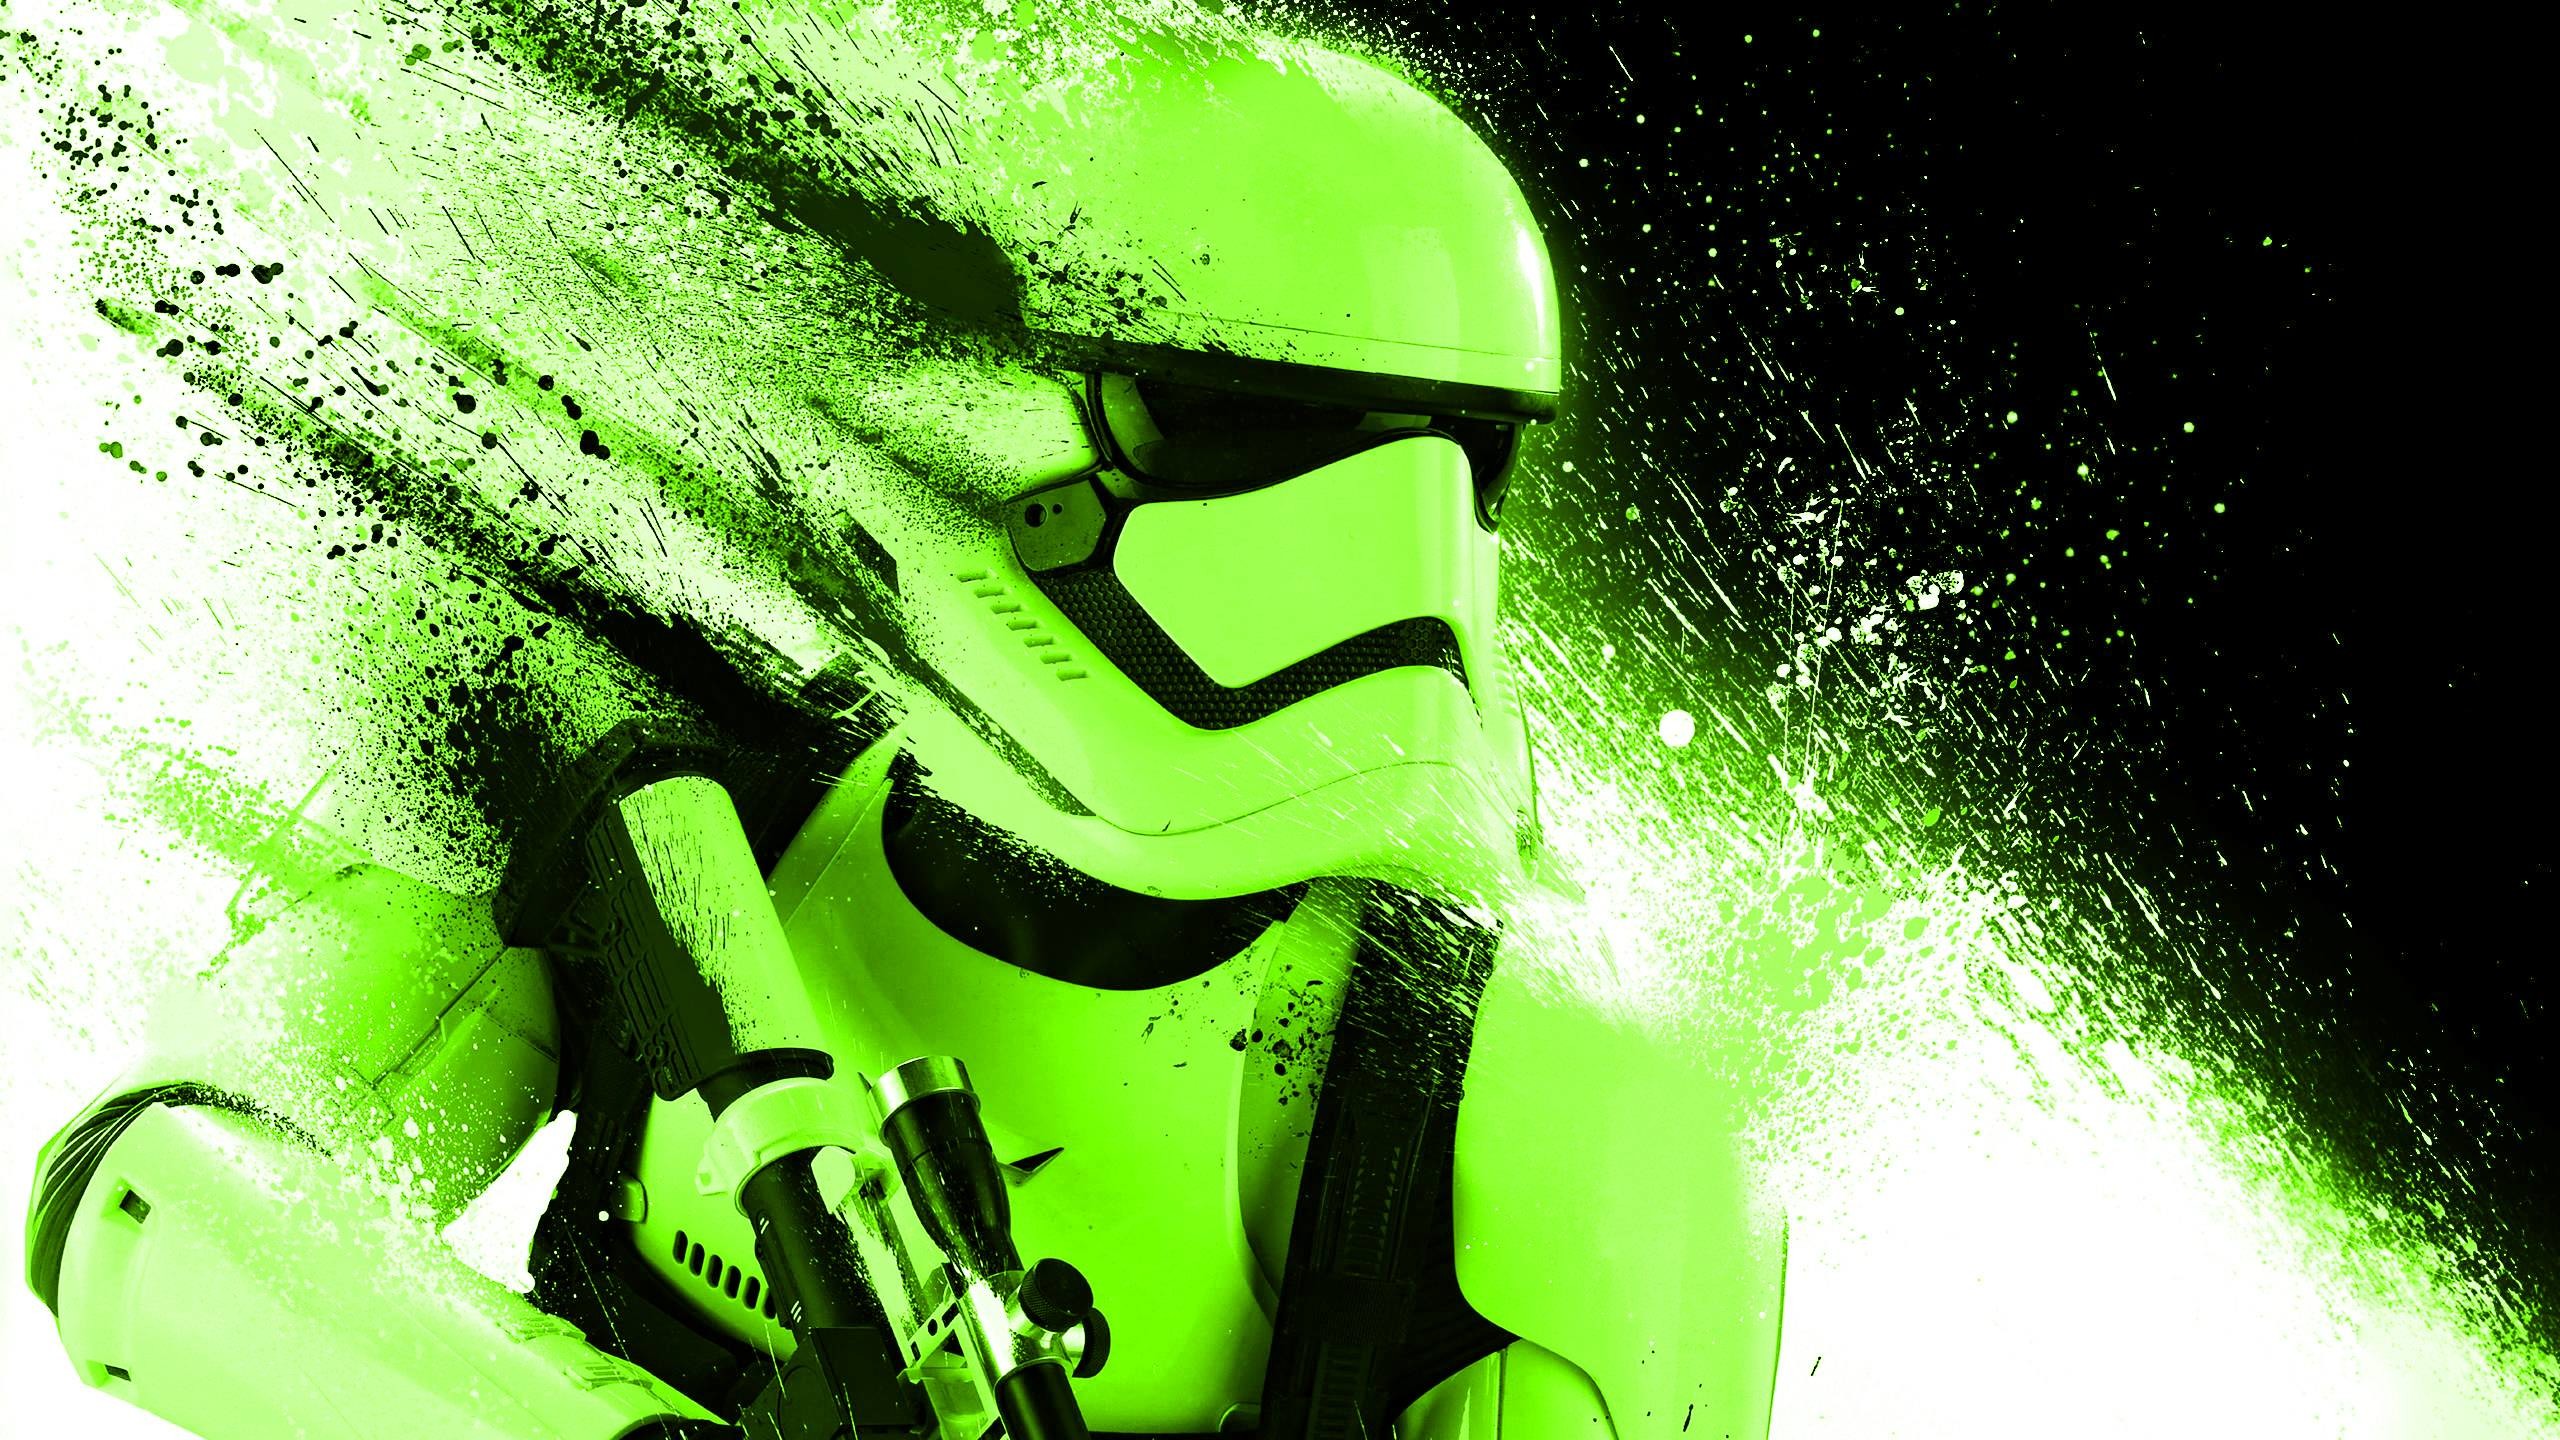 2560x1440 Dw, I got your Mountain Dew stormtrooper right here.